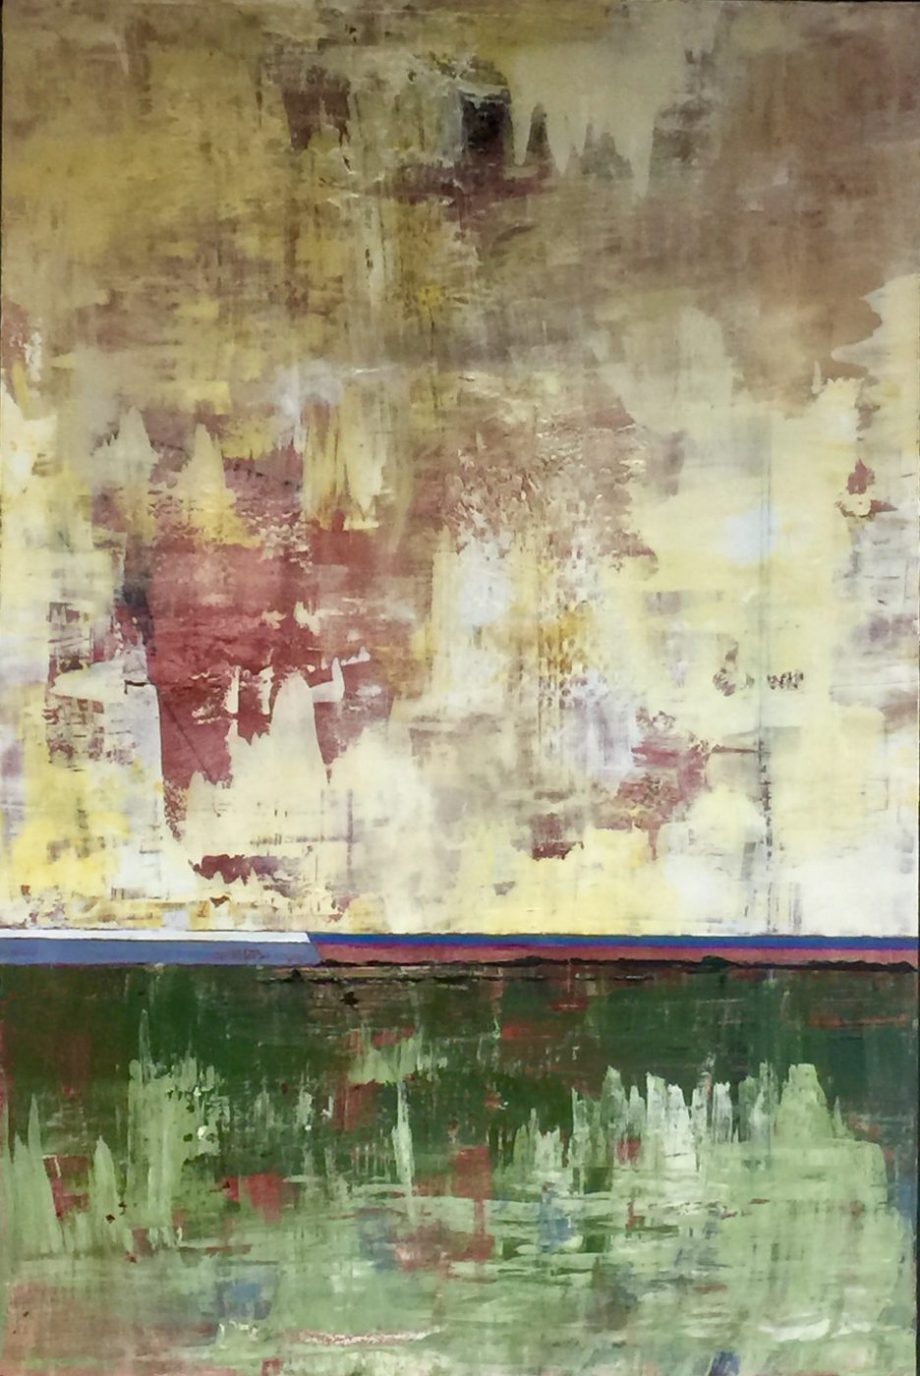 Jack London, No. 4 by Kristen Jensen. (Abstract Acrylic Painting)